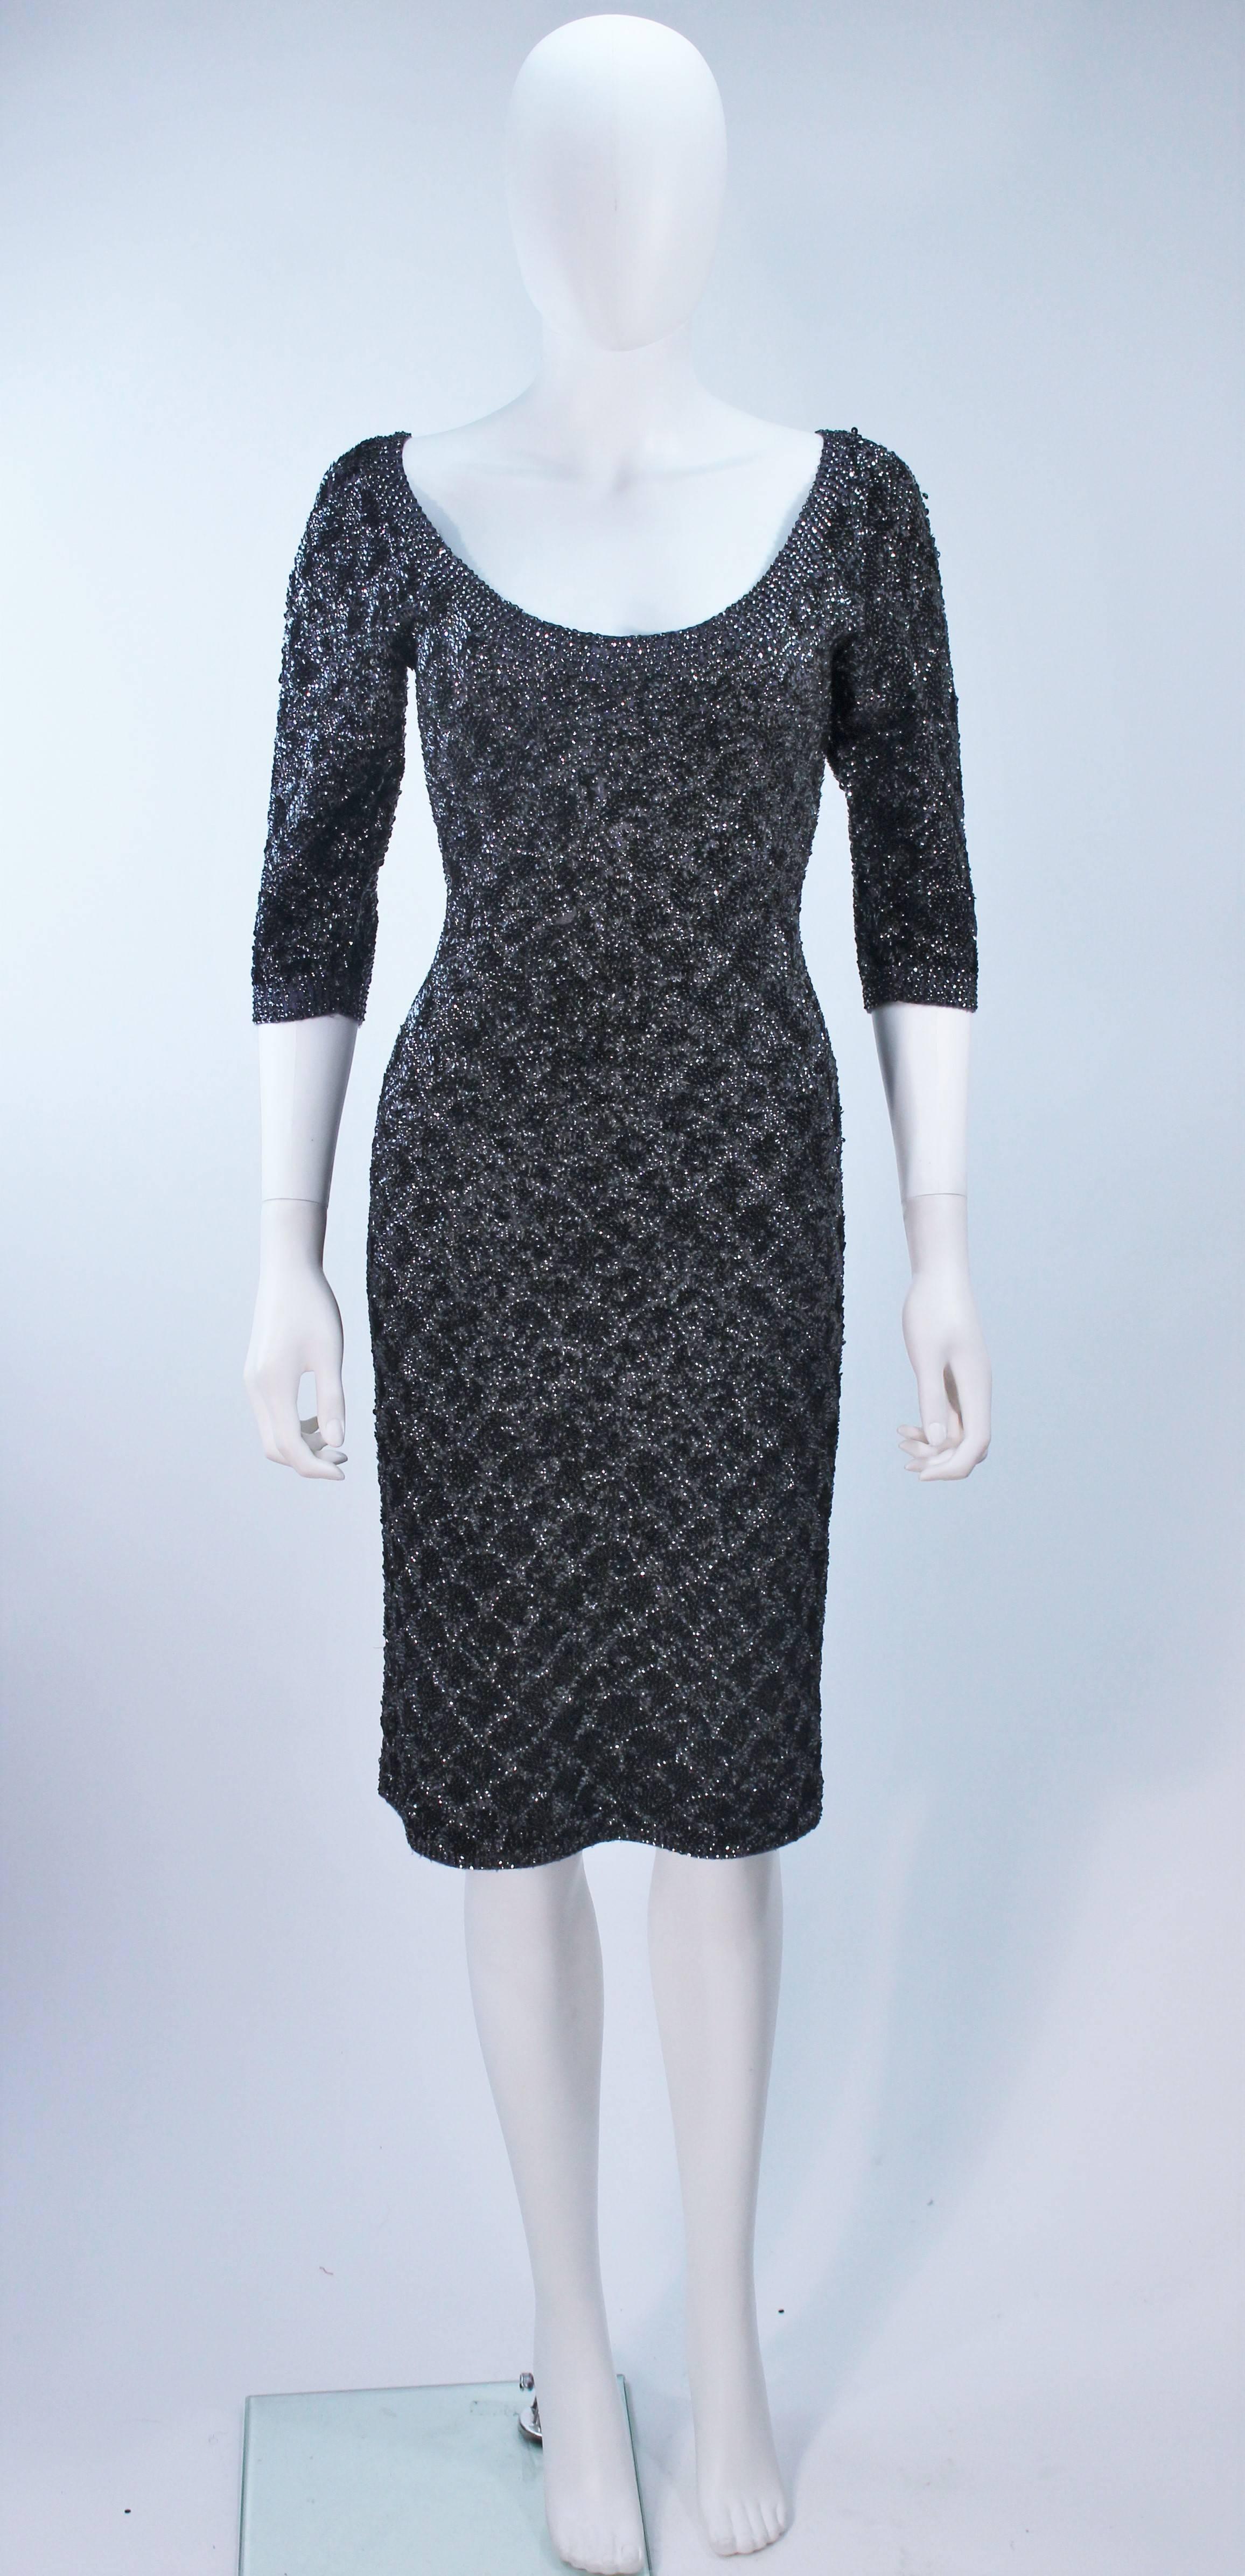 This Sydney's cocktail dress is composed of a stretch grey knit wool with a black & gunmetal metallic sequin applique. There is a center back zipper closure. In excellent vintage condition. 

**Please cross-reference measurements for personal